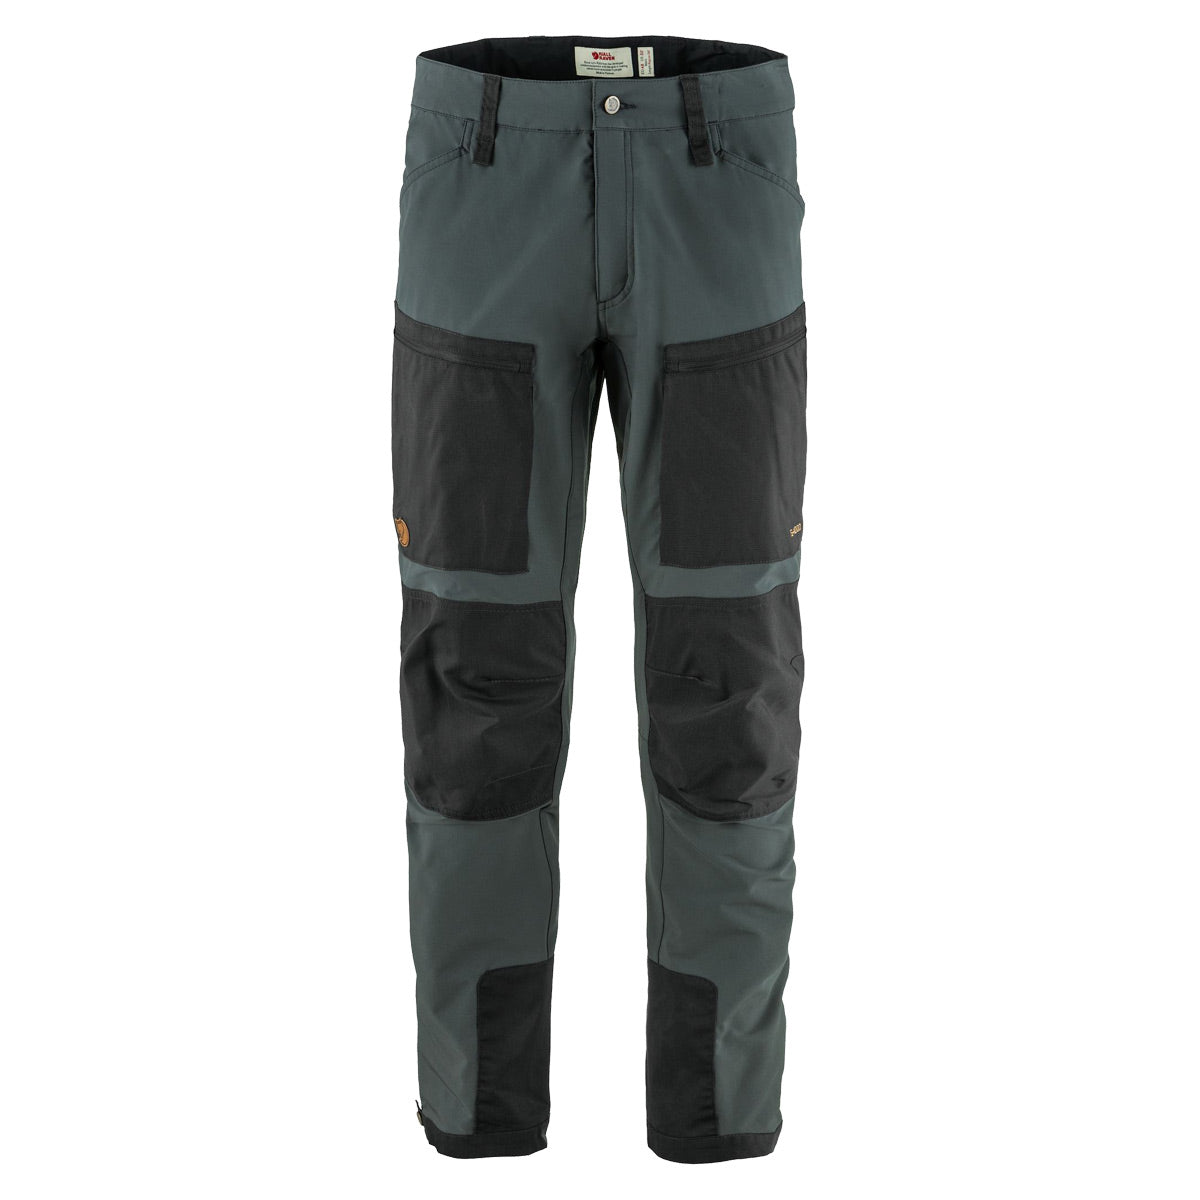 Fjallraven Men's Vidda Pro Ventilated Trousers Long - Various Sizes and  Colors | eBay